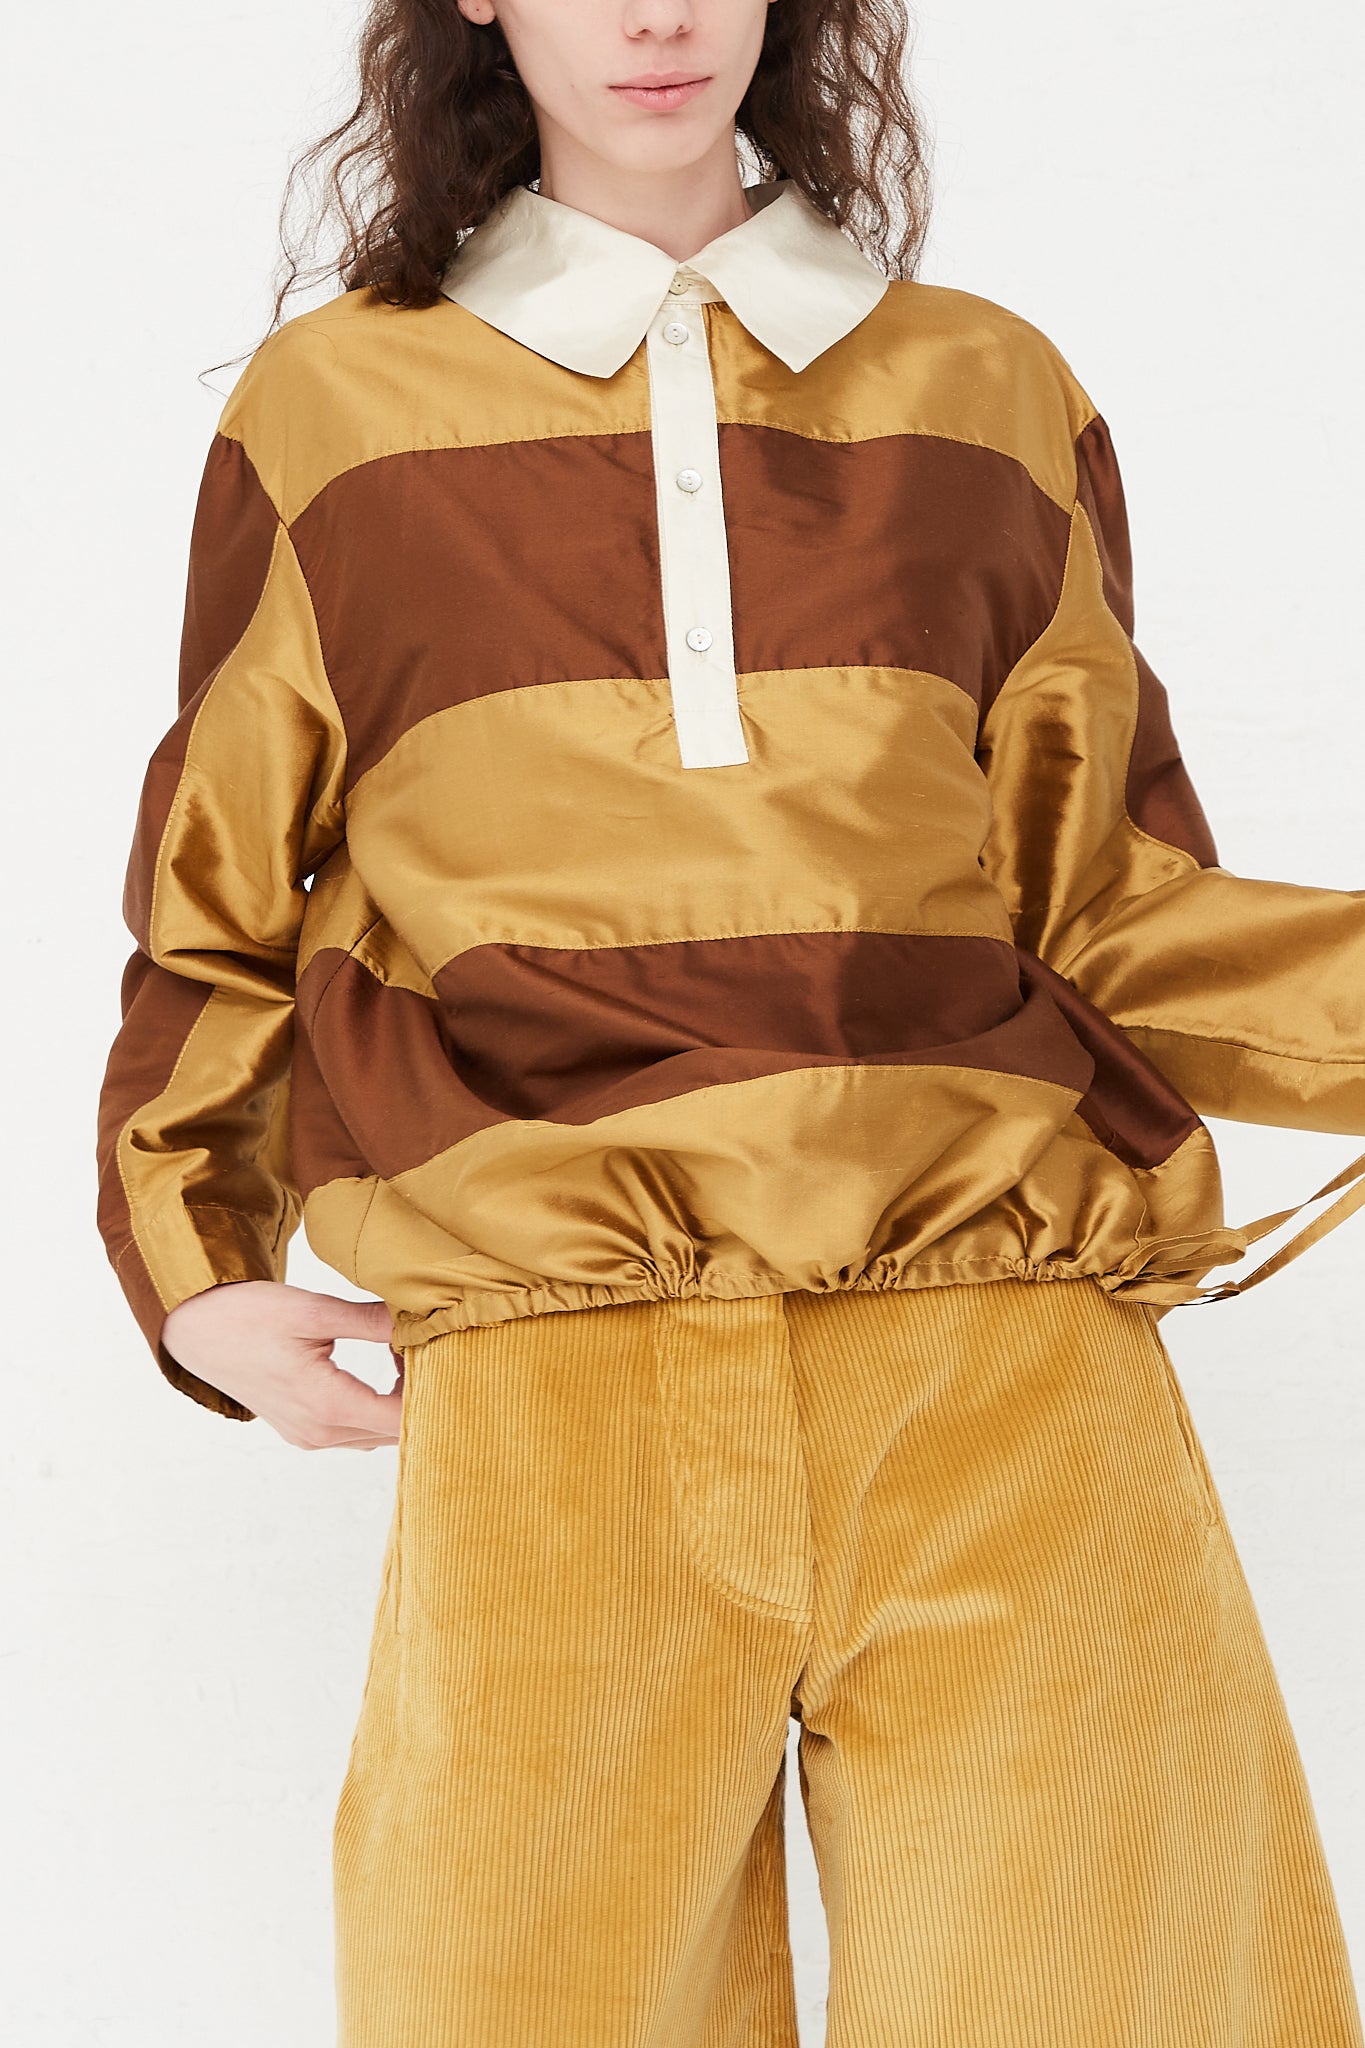 A model wearing a striped rugby shirt in a shiny silk doupion. Features a contrast fold-over collar and button placket, with an adjustable drawstring at hem. Front view and up close. Highlighting drawstring detail. Designed by Cawley - Oroboro Store 